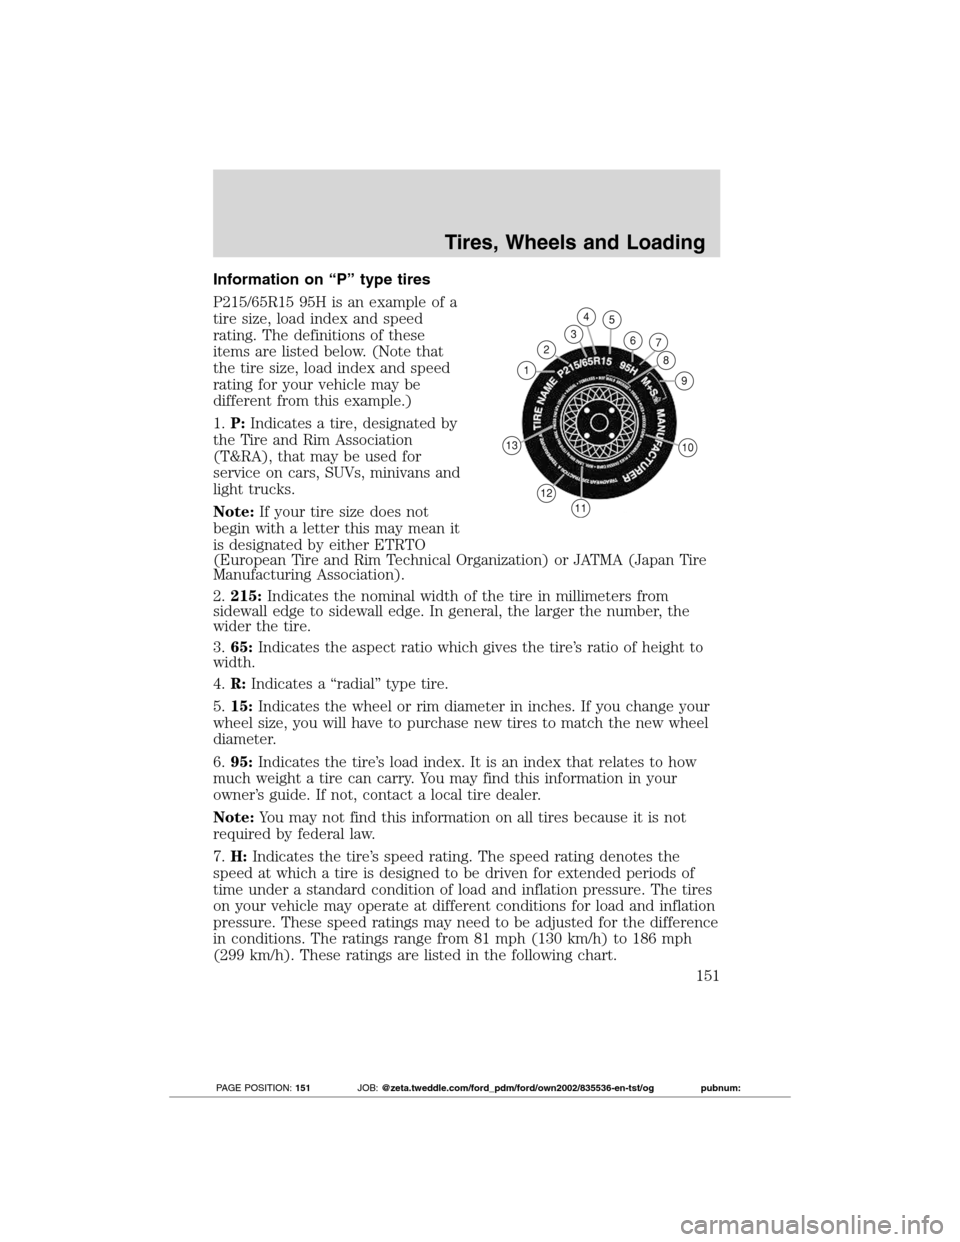 FORD TRANSIT CONNECT 2012 1.G Owners Manual Information on “P” type tires
P215/65R15 95H is an example of a
tire size, load index and speed
rating. The definitions of these
items are listed below. (Note that
the tire size, load index and sp